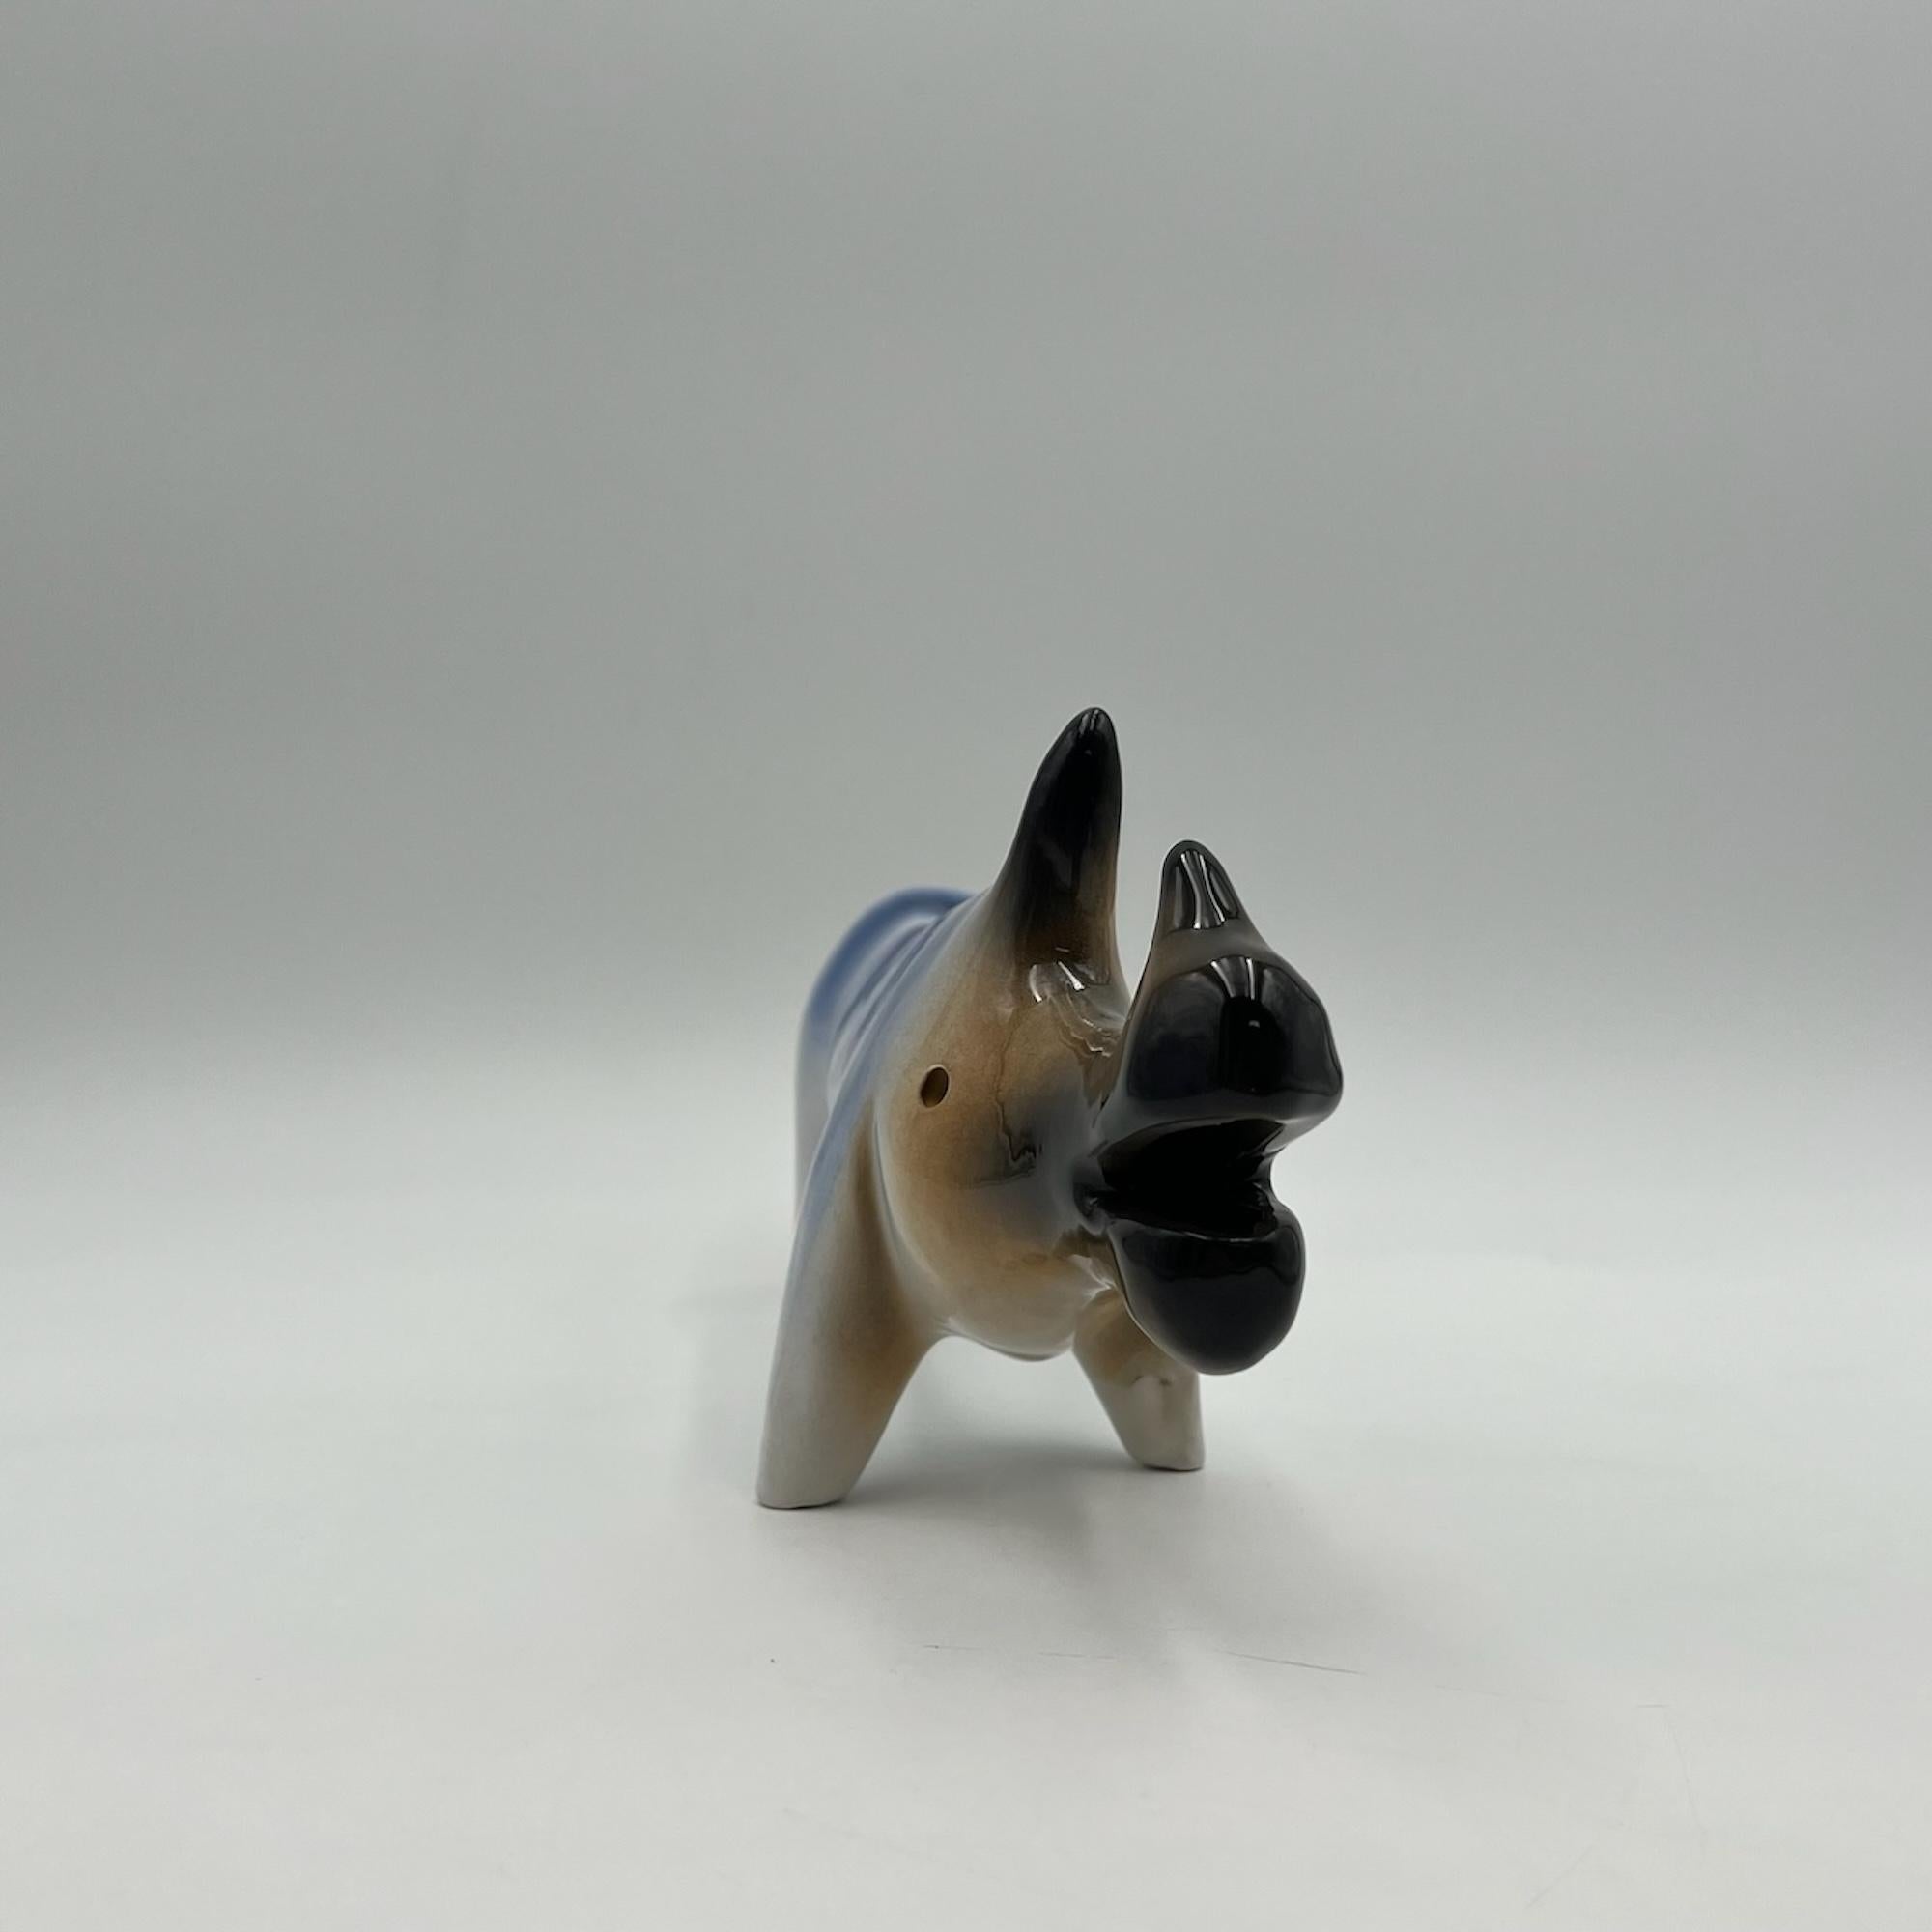 Immerse yourself in the captivating world of space age aesthetics with this exceptional vintage ceramic figurine crafted by the renowned Italian artist Roberto Rigon in the 1970s. This handmade sculpture, depicting a rhinoceros, is a stunning blend